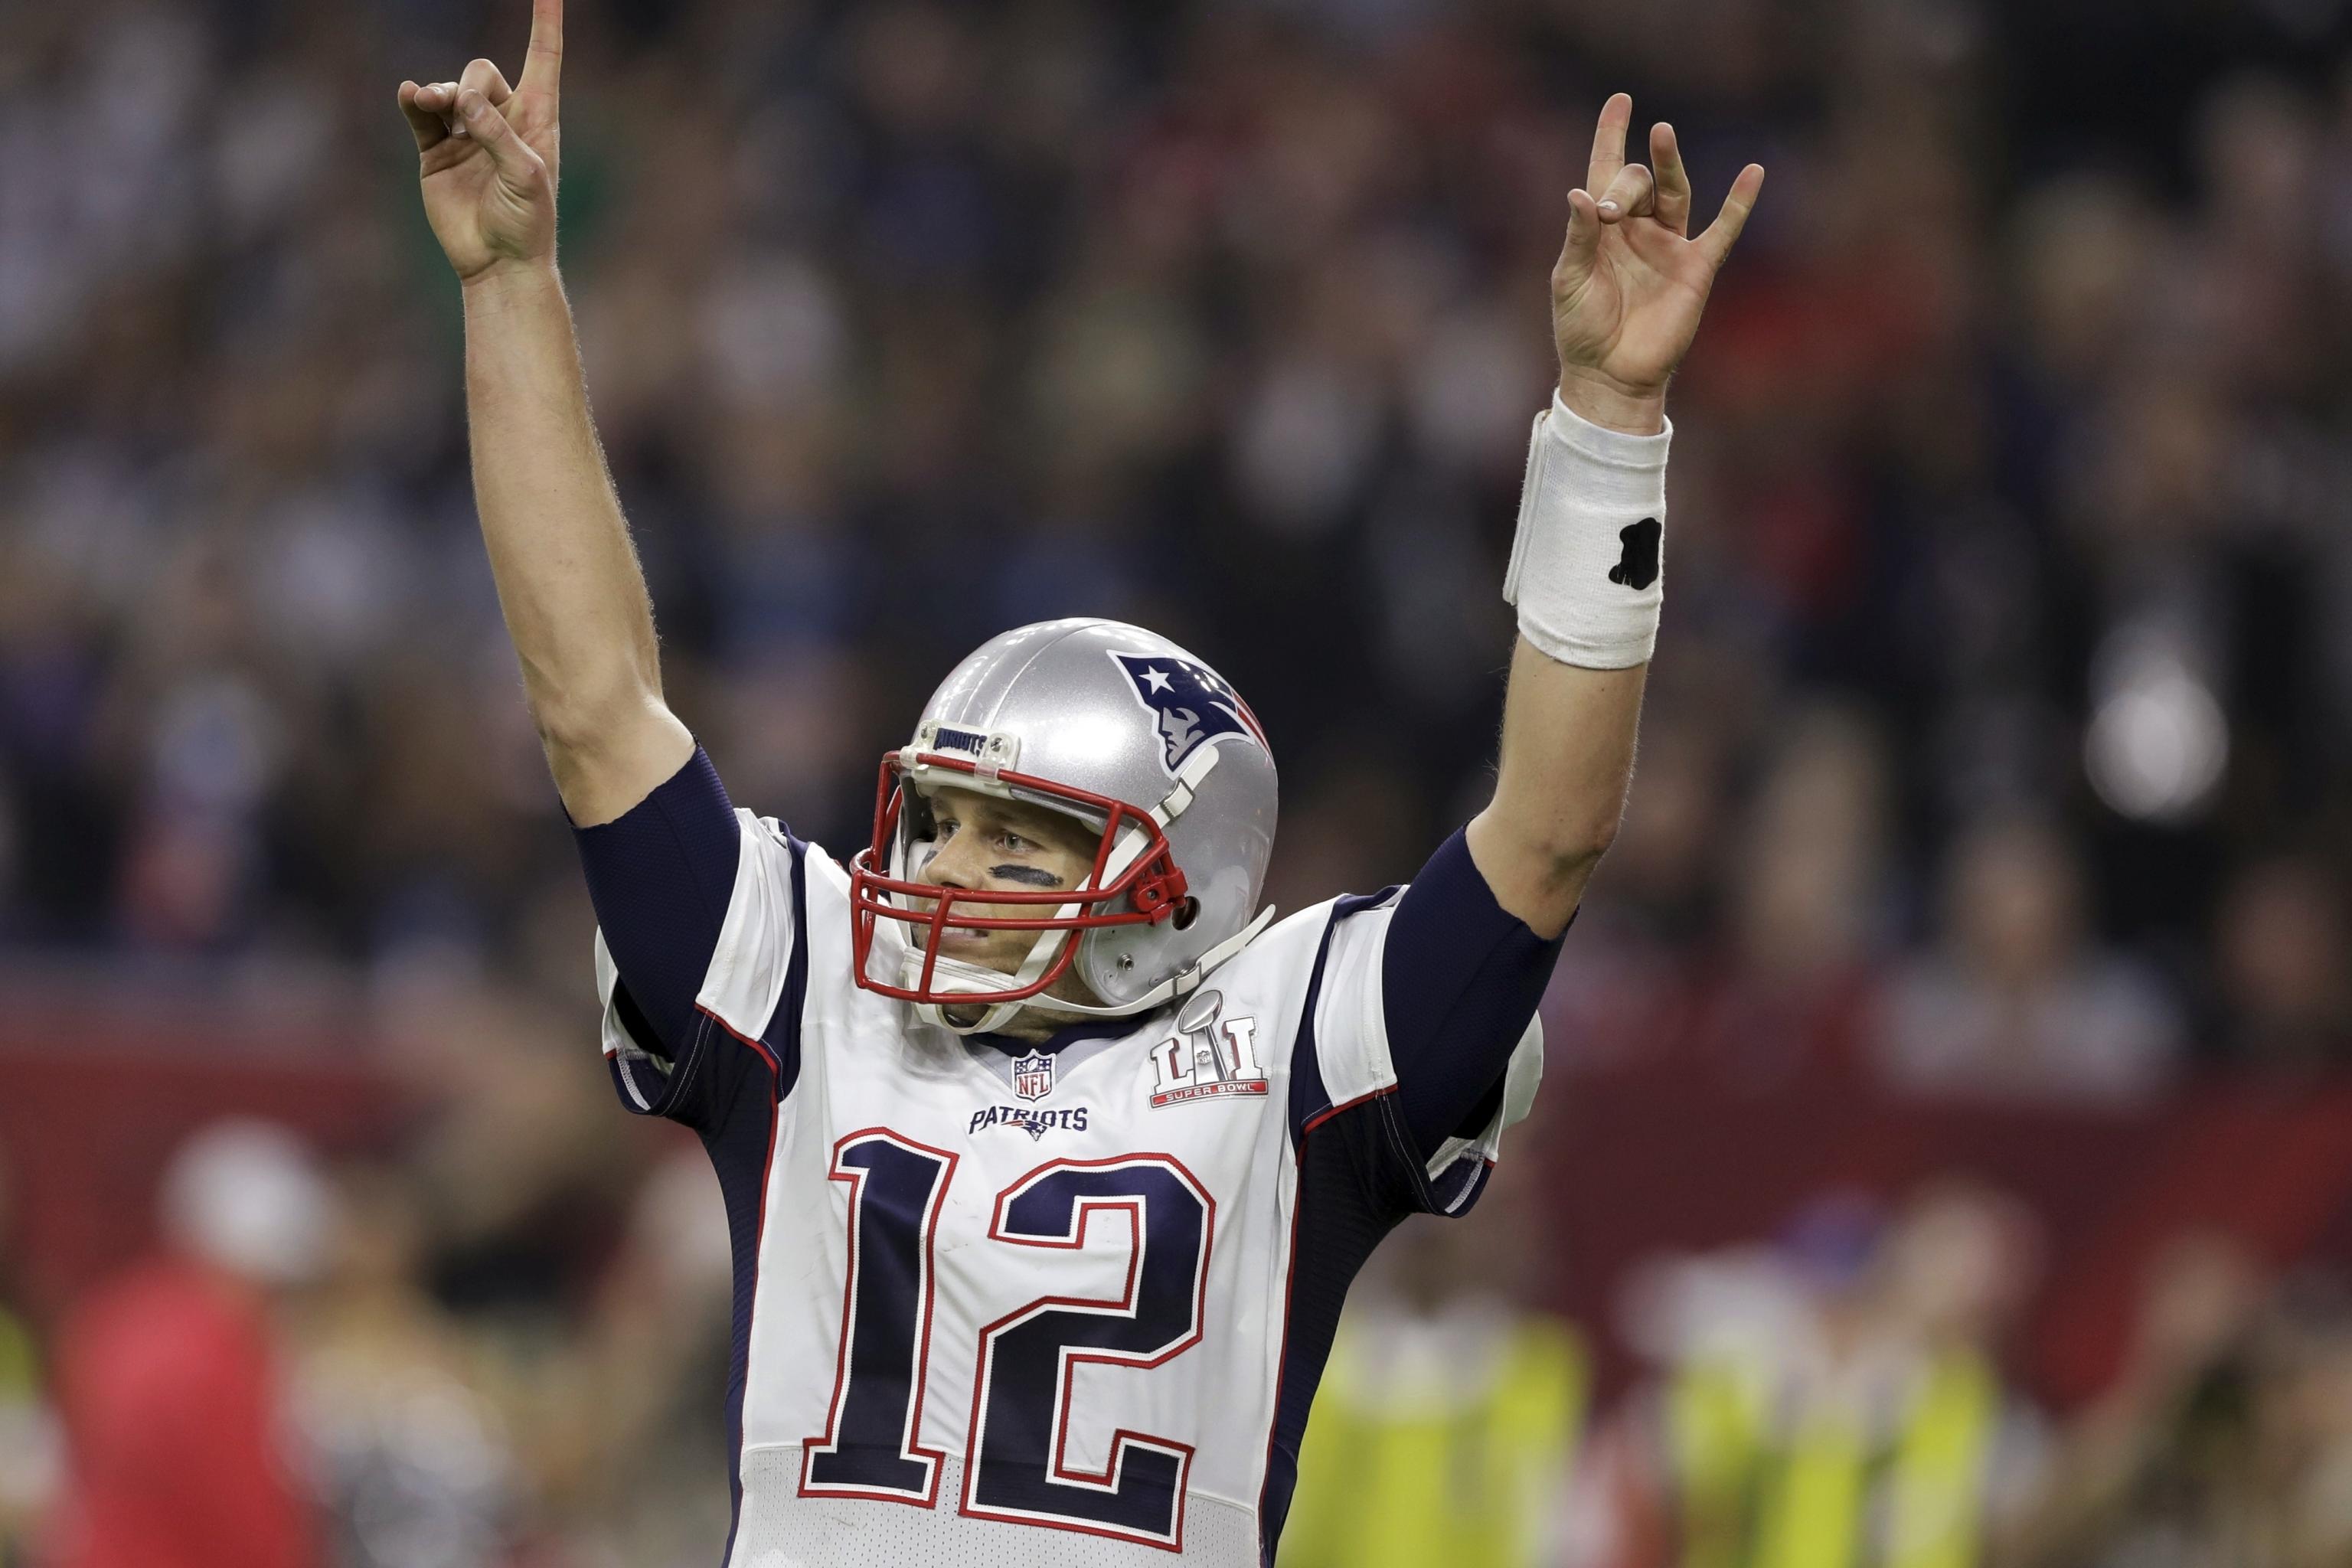 The Patriots are built for Tom Brady's return, even after playoff